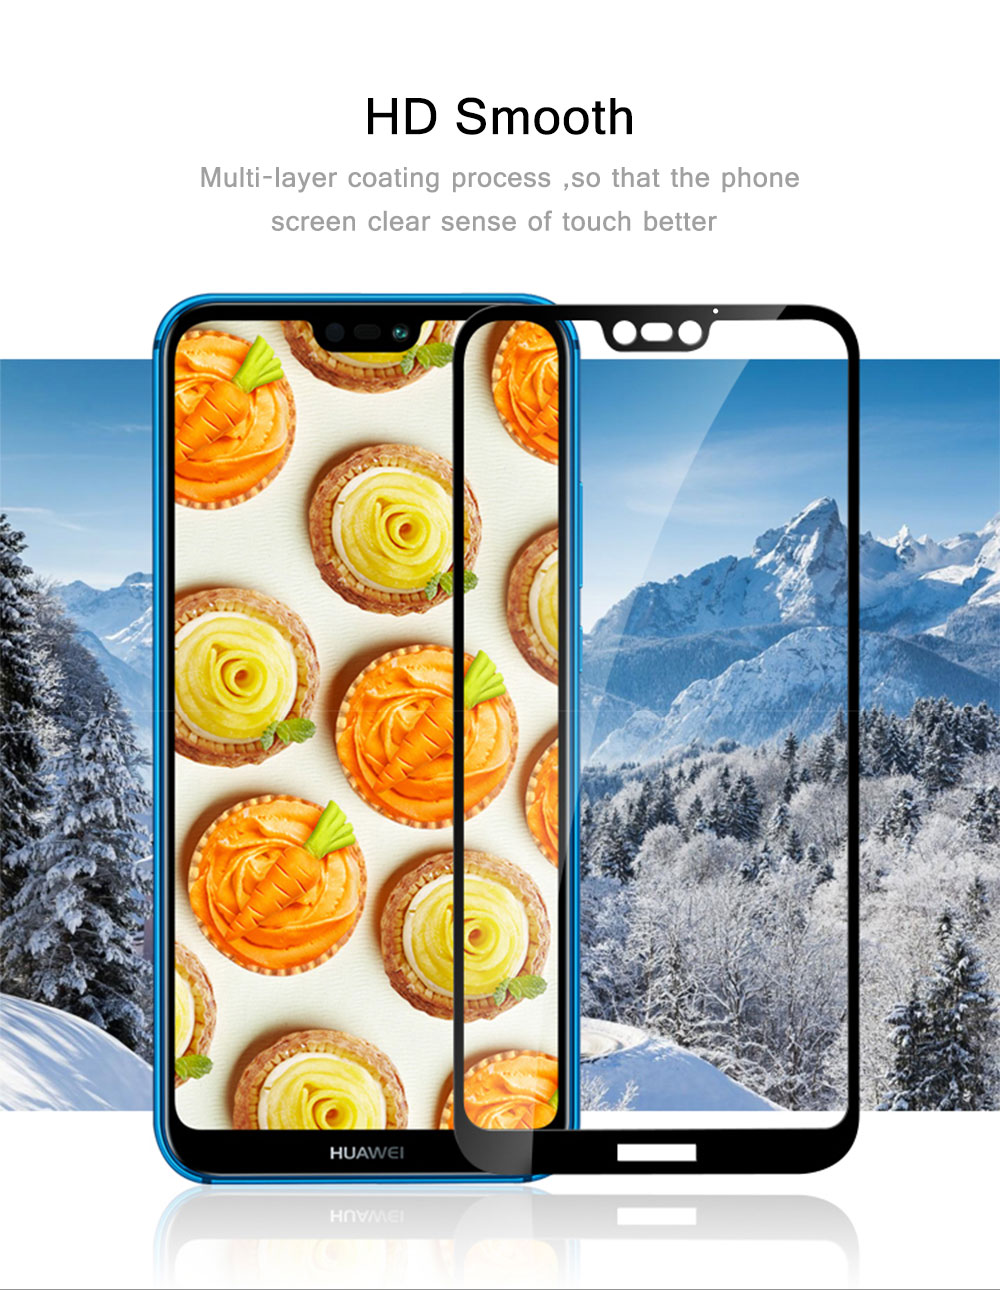 BAKEEY-Anti-Explosion-Full-Cover-Tempered-Glass-Screen-Protector-for-Huawei-Nova-3e-Huawei-P20-Lite-1302576-1